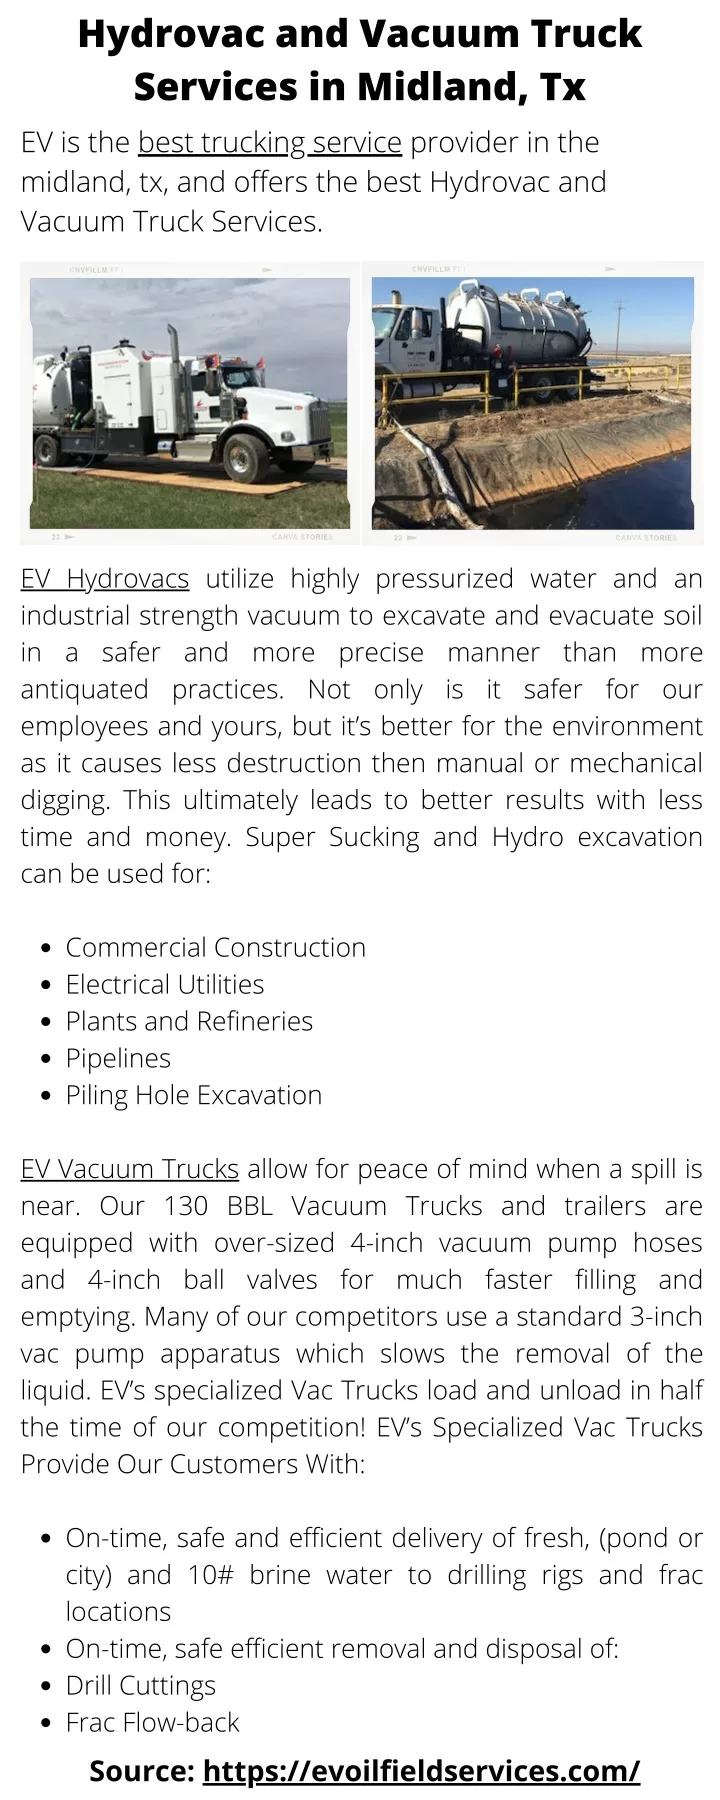 hydrovac and vacuum truck services in midland